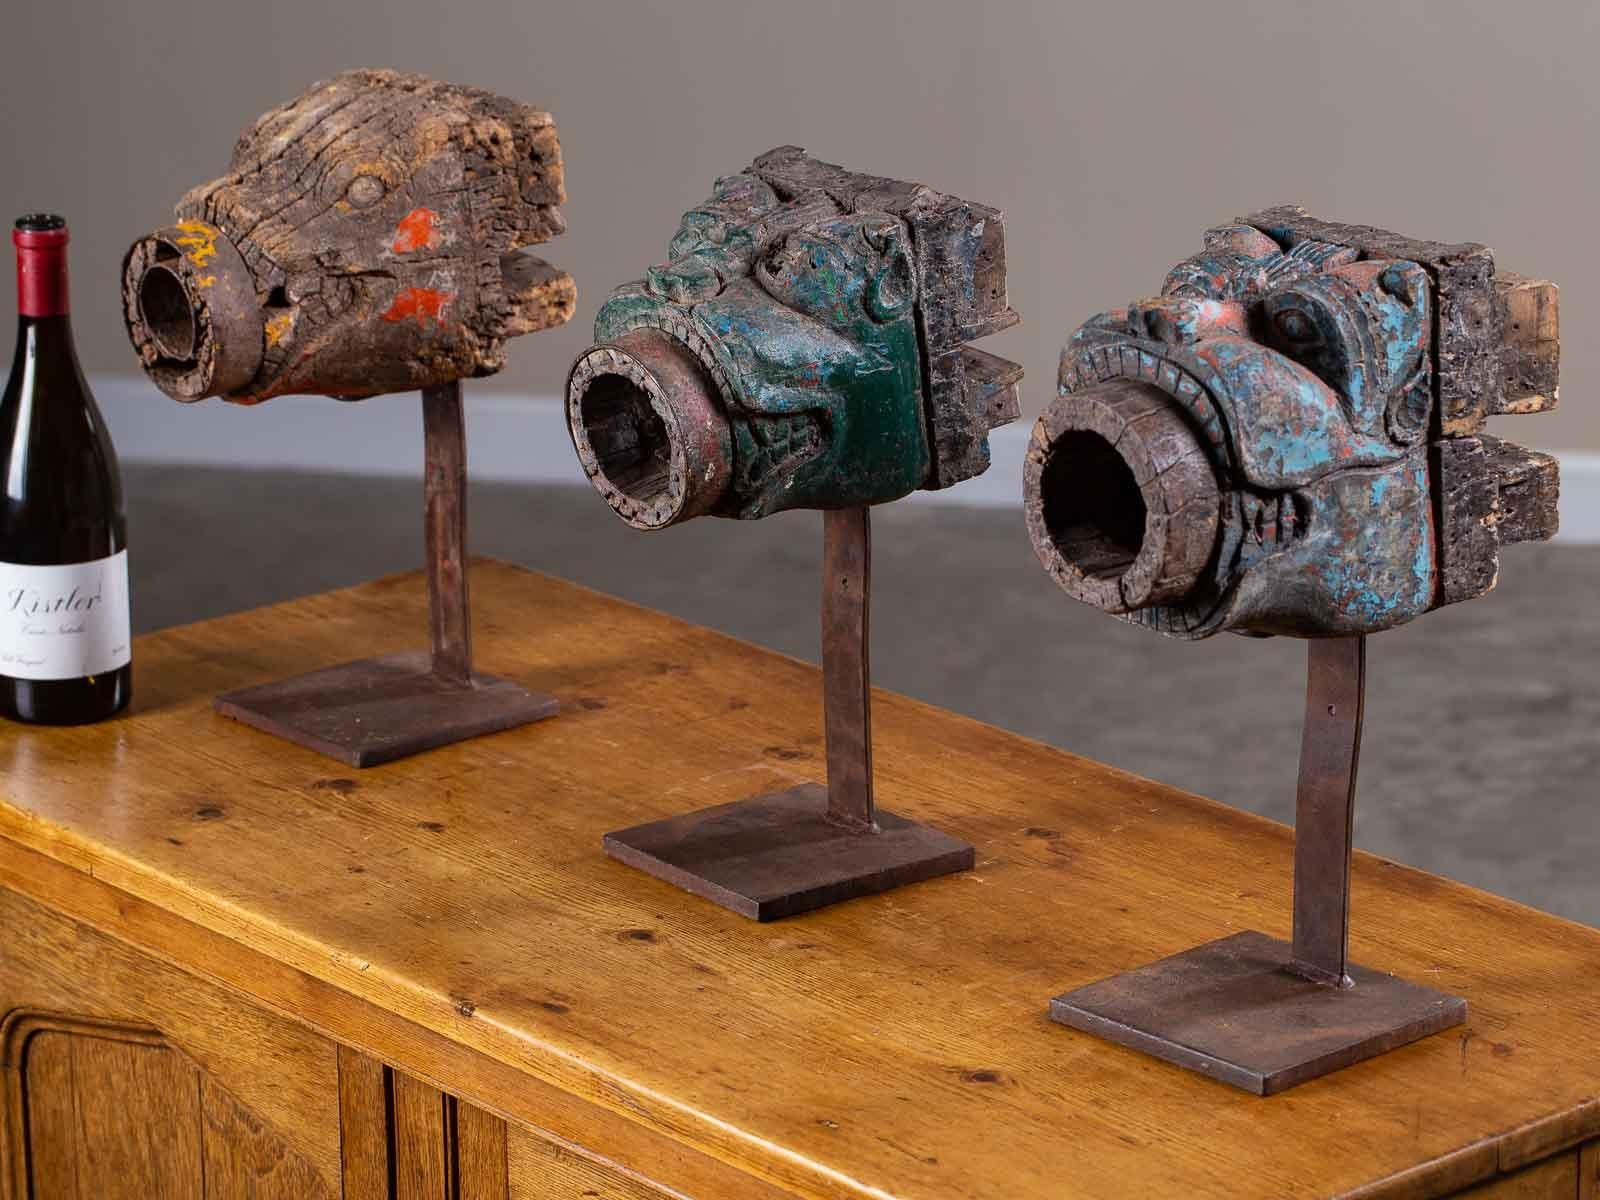 A set of three hand-carved and painted animal head sculptures circa 1890 Indonesia originally used at the top of a column to connect a crossbeam. We love the wonderful details of both the carving and the faded paint and imagine how terrific these